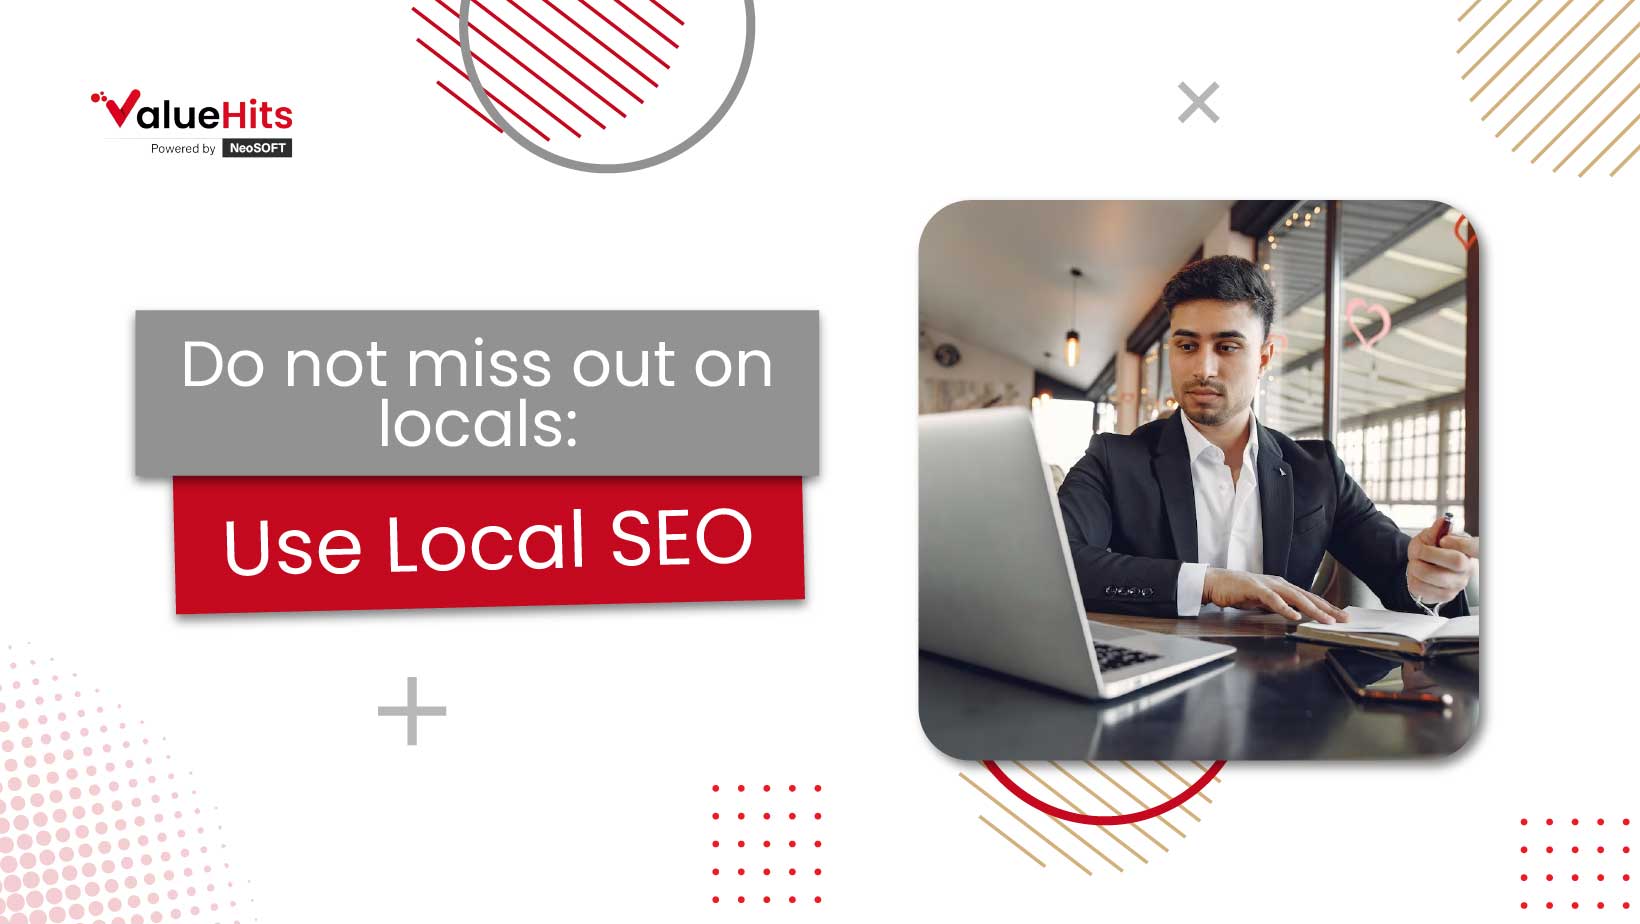 Do not miss out on locals: Use Local SEO